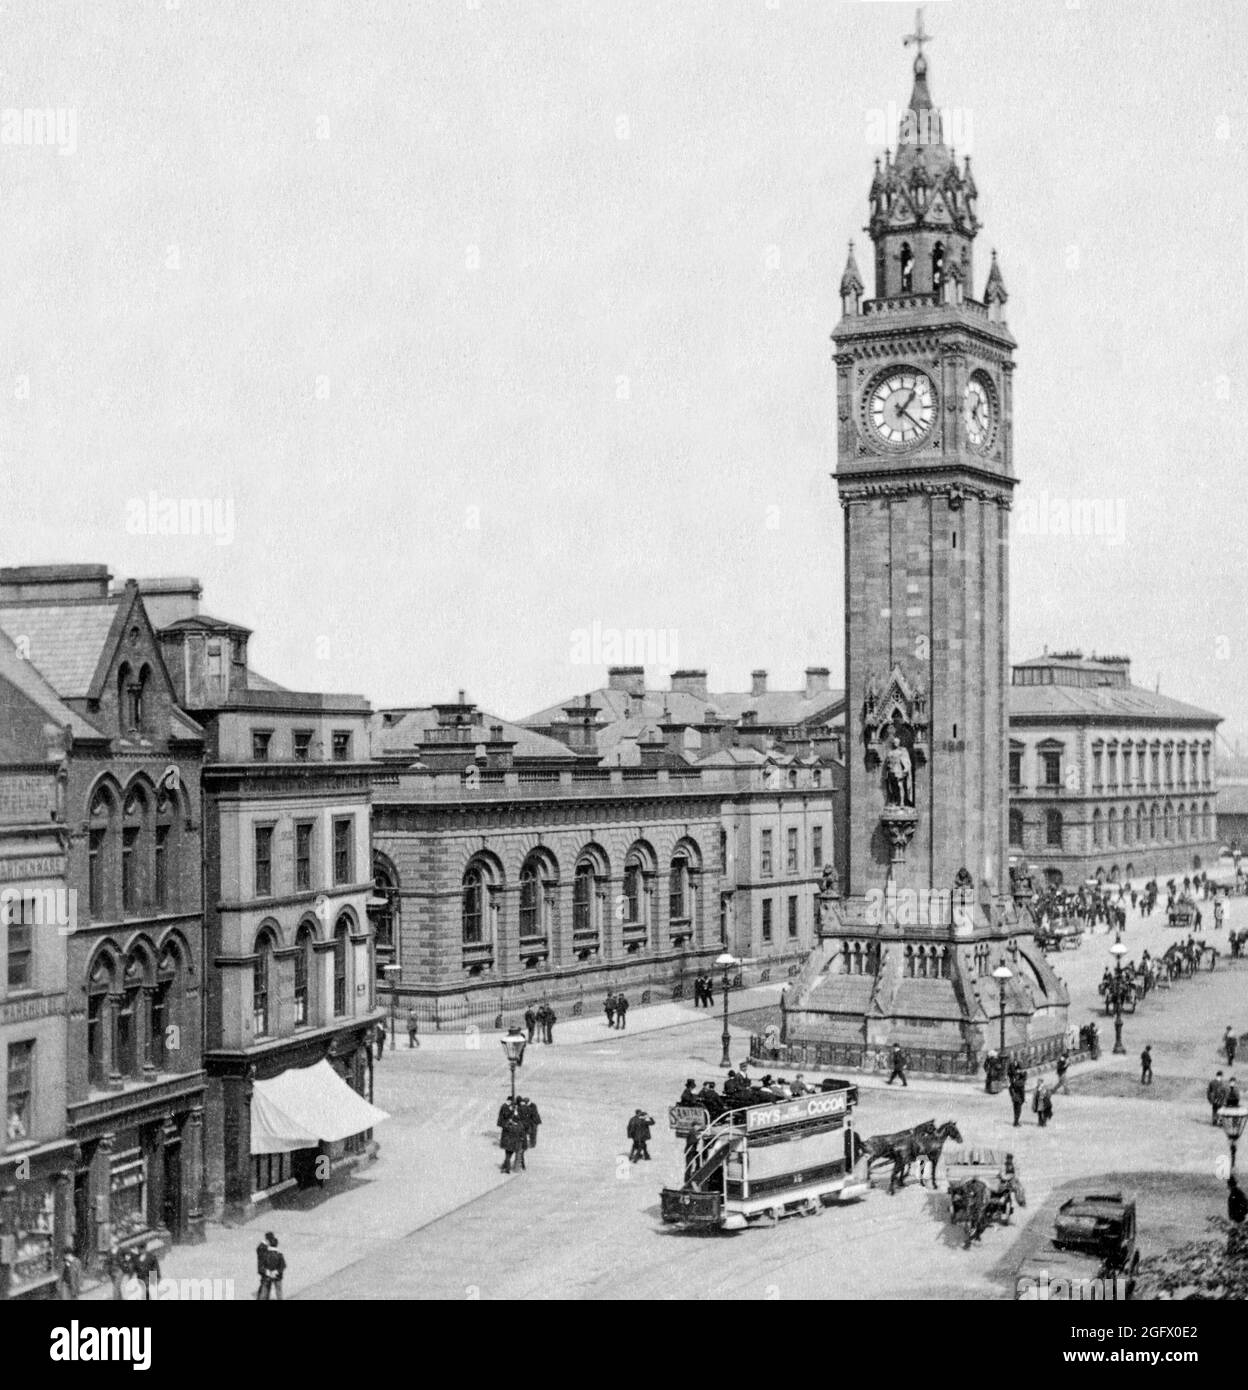 An early 20th century  view of High Street and the Albert Memorial Clock (more commonly referred to as the Albert Clock) situated at Queen's Square in Belfast, Northern Ireland. It was completed in 1869 and is one of the best known landmarks of Belfast. Stock Photo